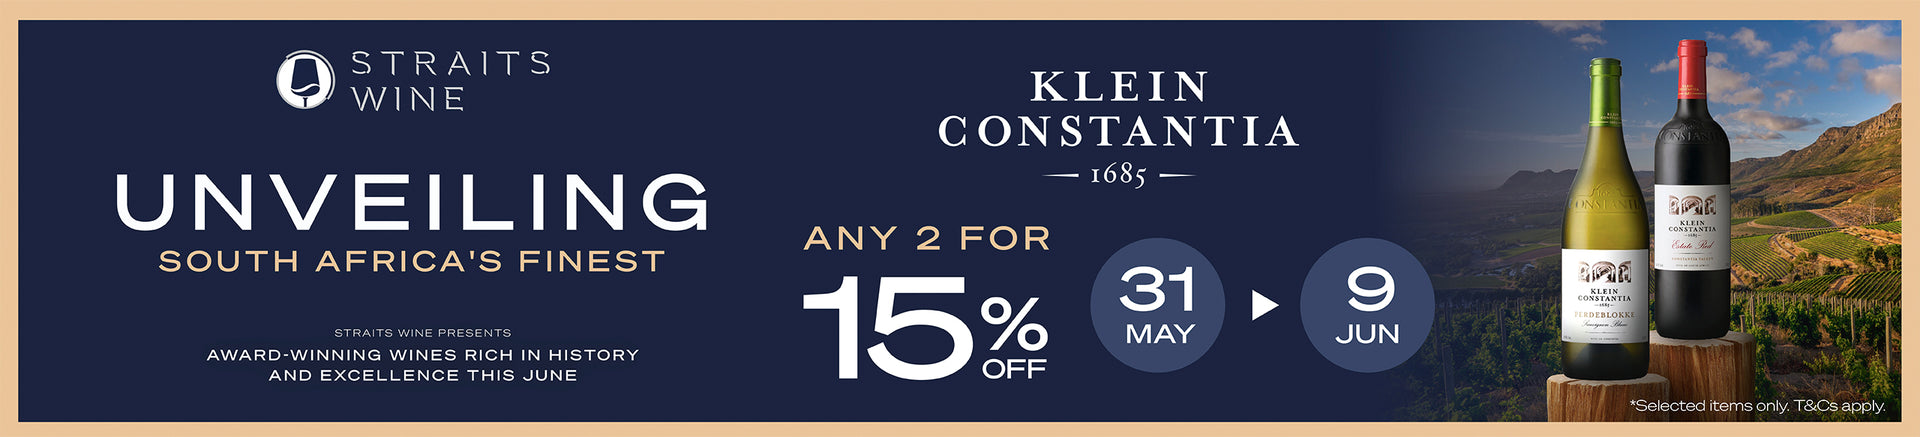 Unveiling South Africa's Finest - Klein Constantia